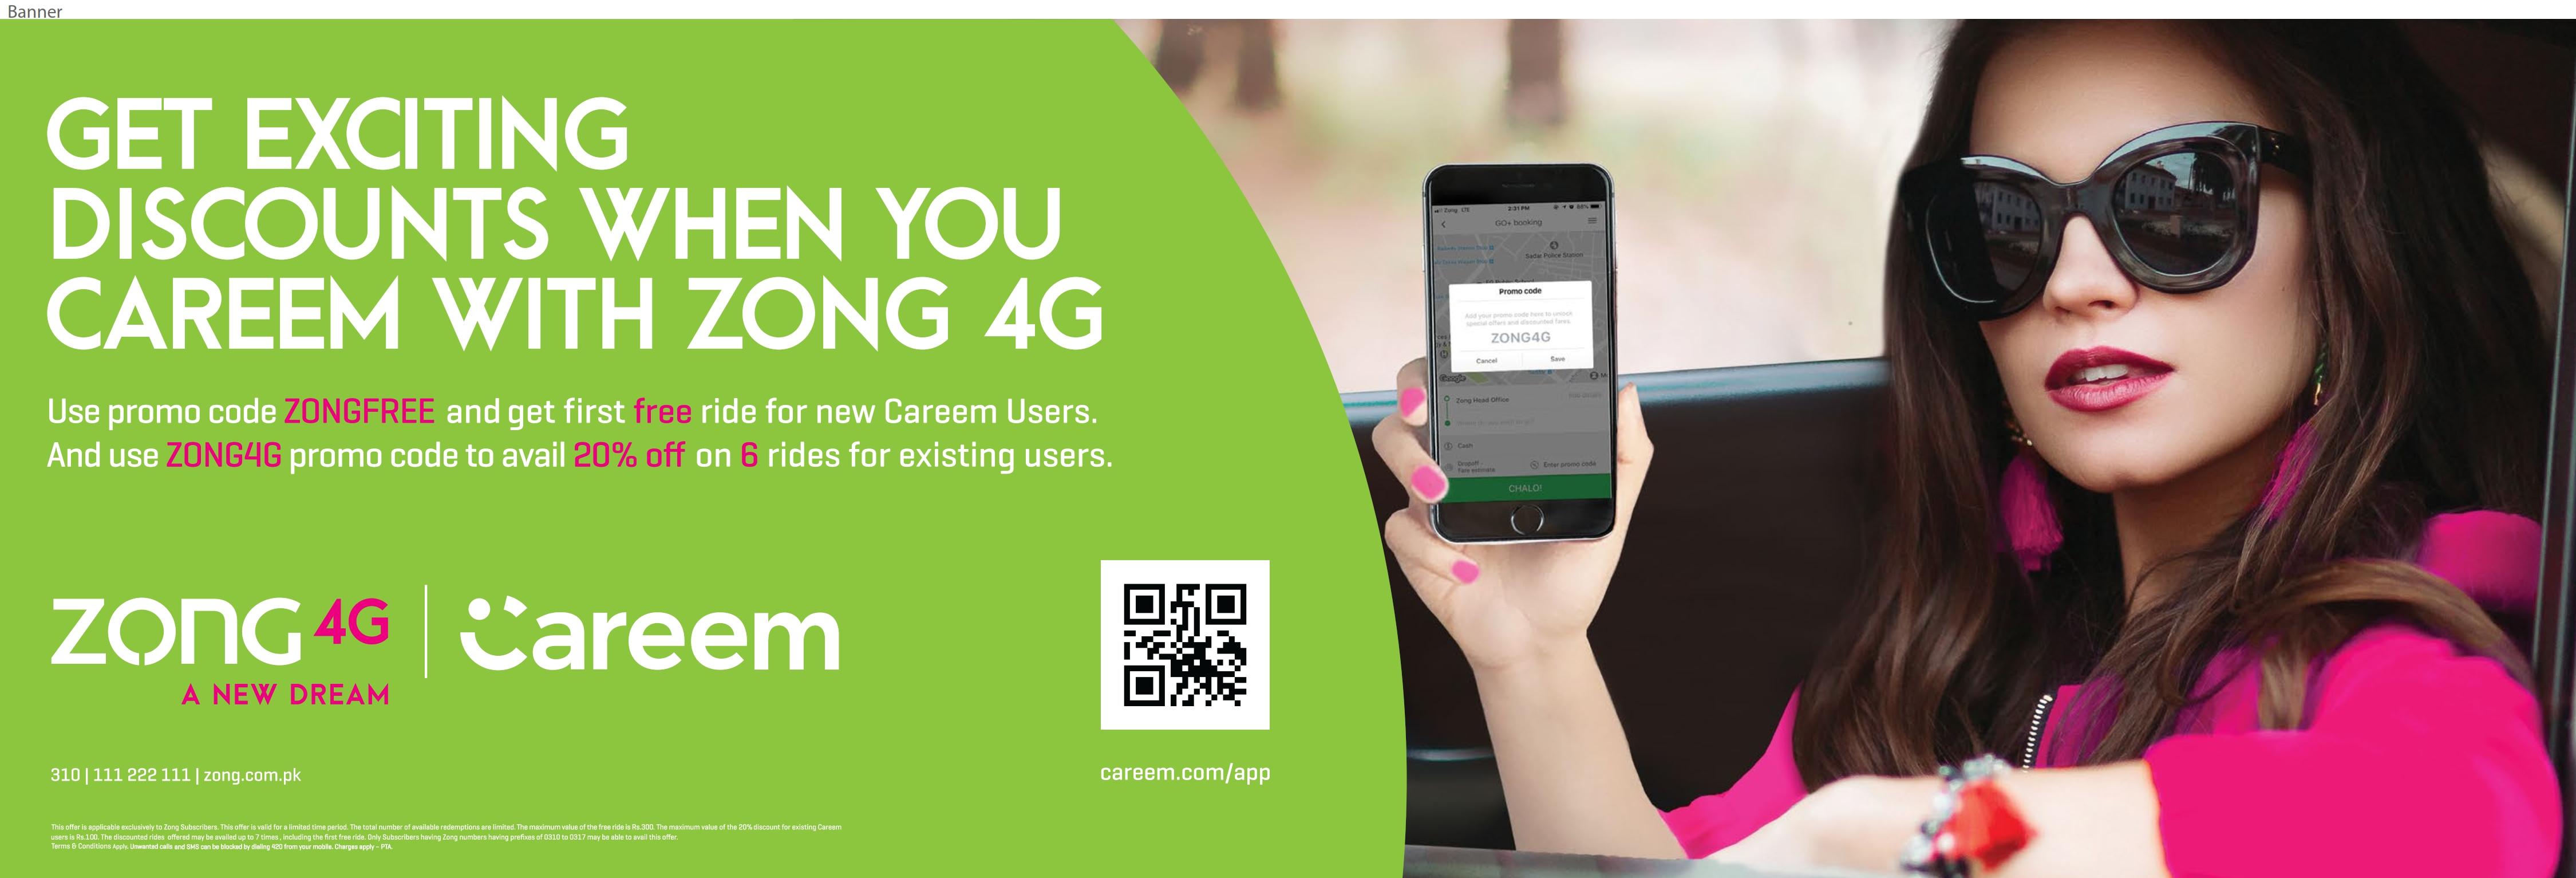 Zong 4G & Careem Partner to Give Exciting Offers to Customers